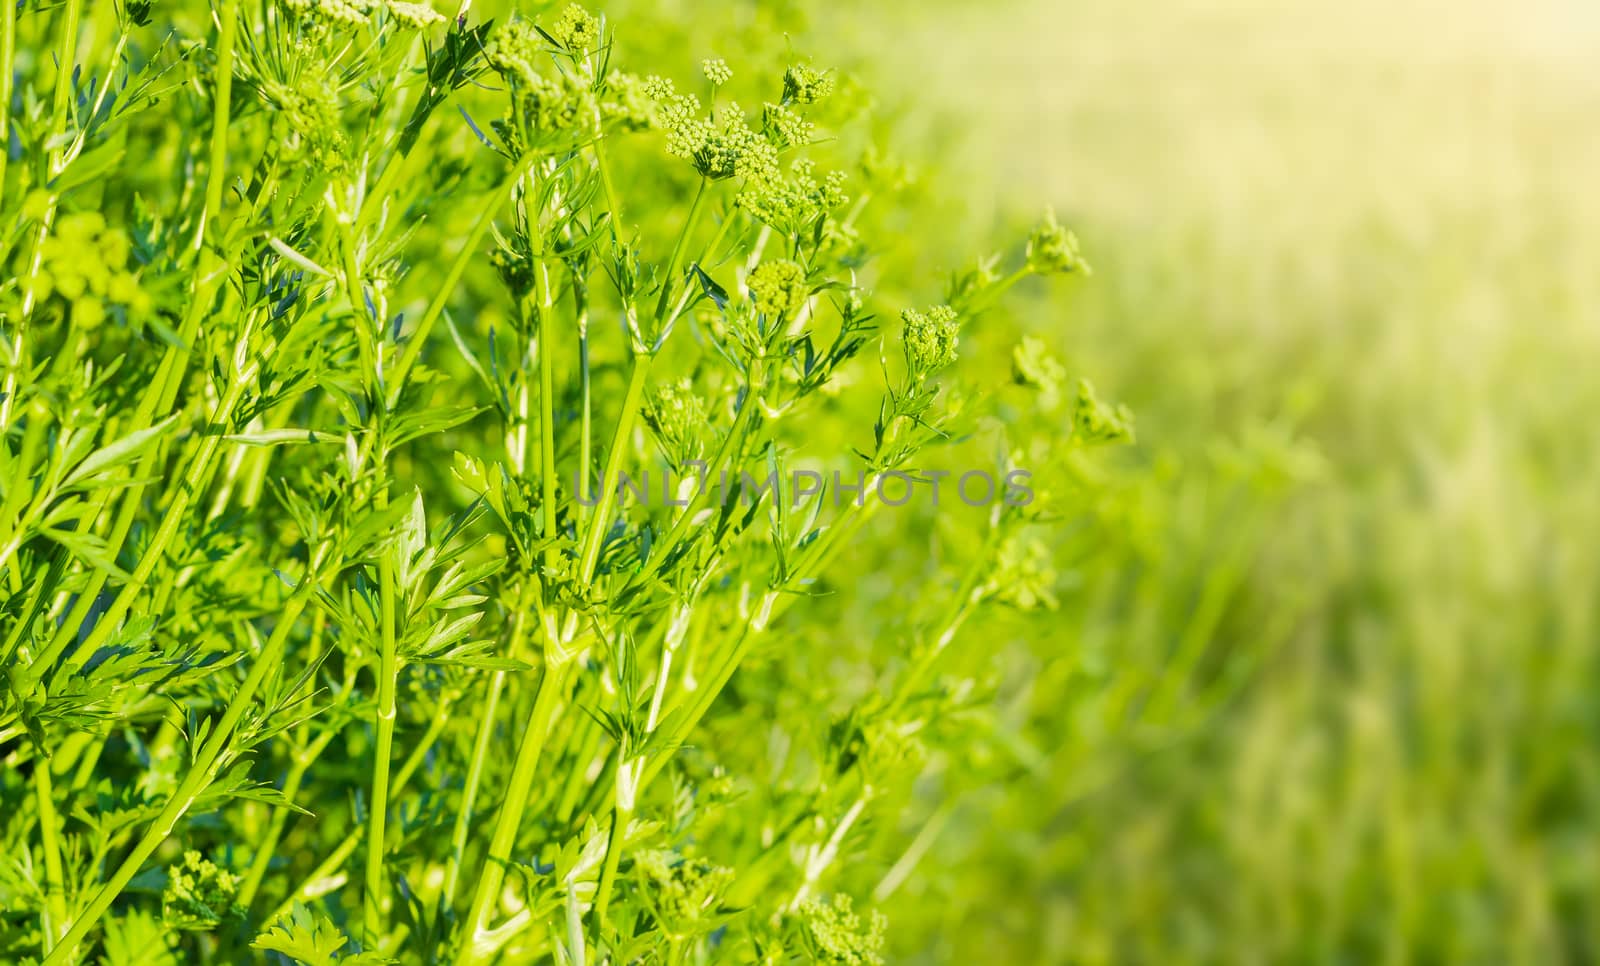 Part of the parsley bush with stems, leaves and inflorescences on a blurred background
